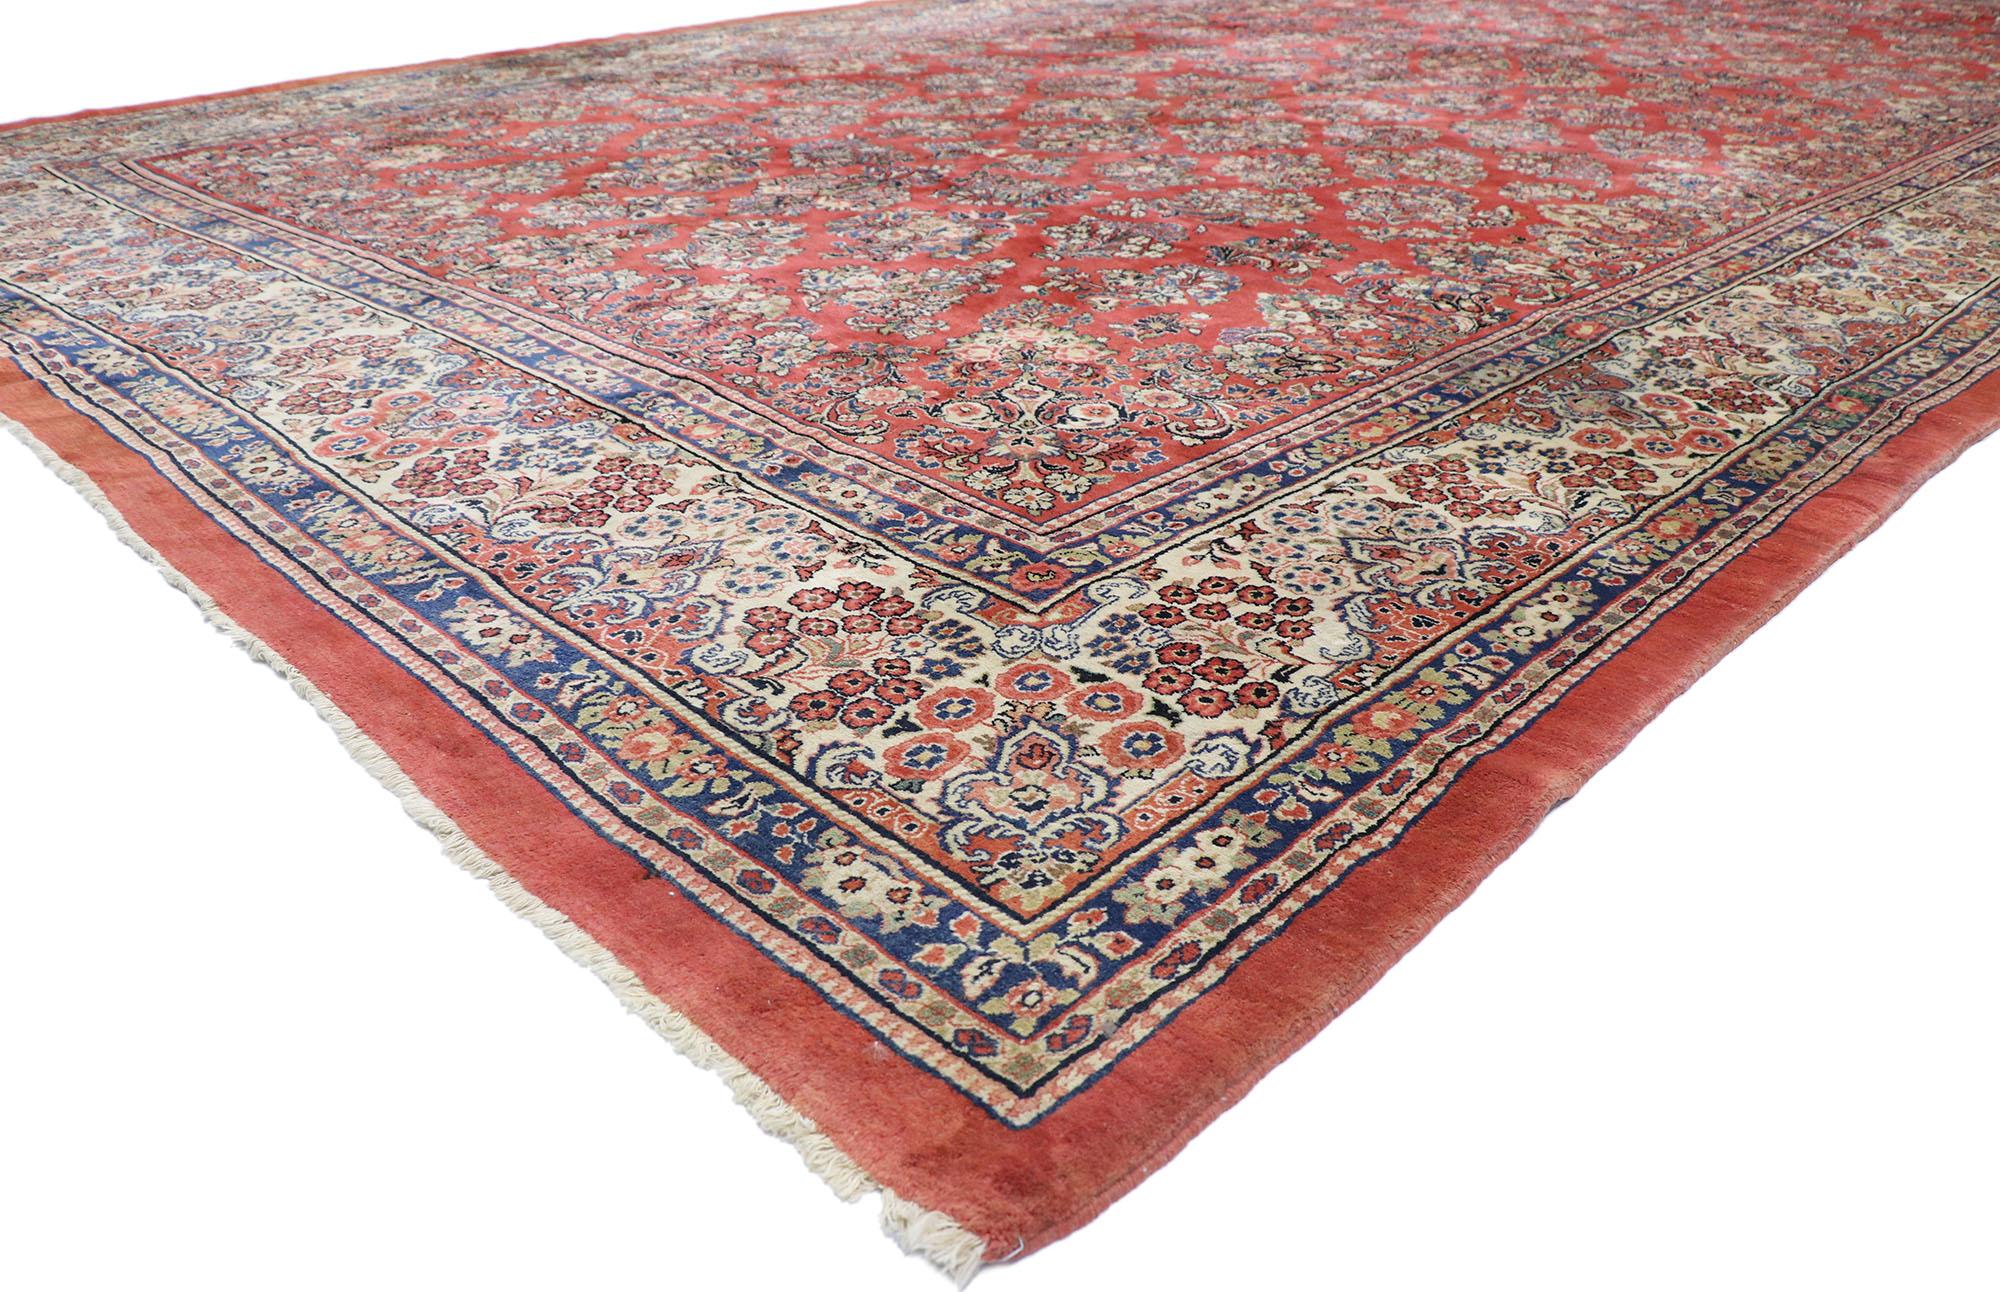 74401 Oversized Antique Persian Sarouk Rug, 11'08 x 22'10. 
With architectural elements of naturalistic flowers and an opulent color scheme, this hand-knotted wool antique Persian Sarouk Palace size rug embodies an American Colonial style. Starting